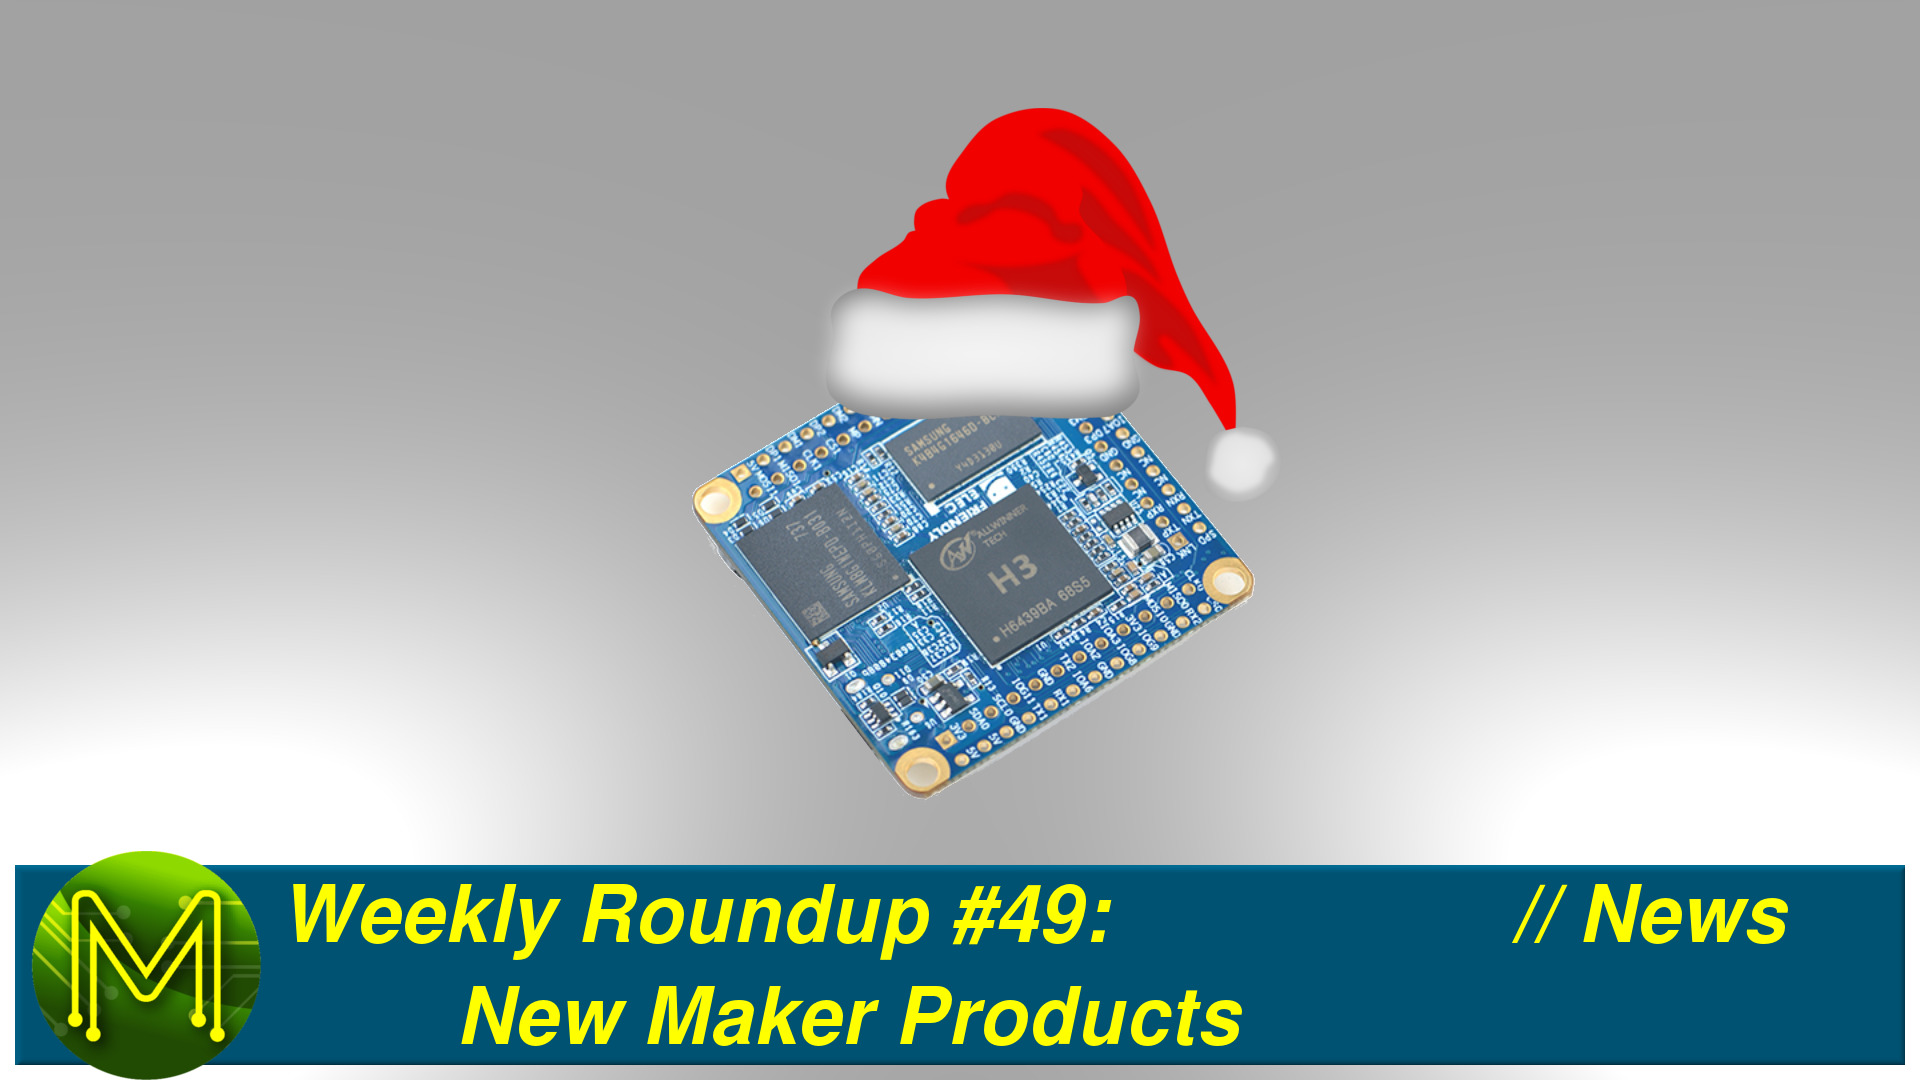 Weekly Roundup #49 - New Maker Products // News